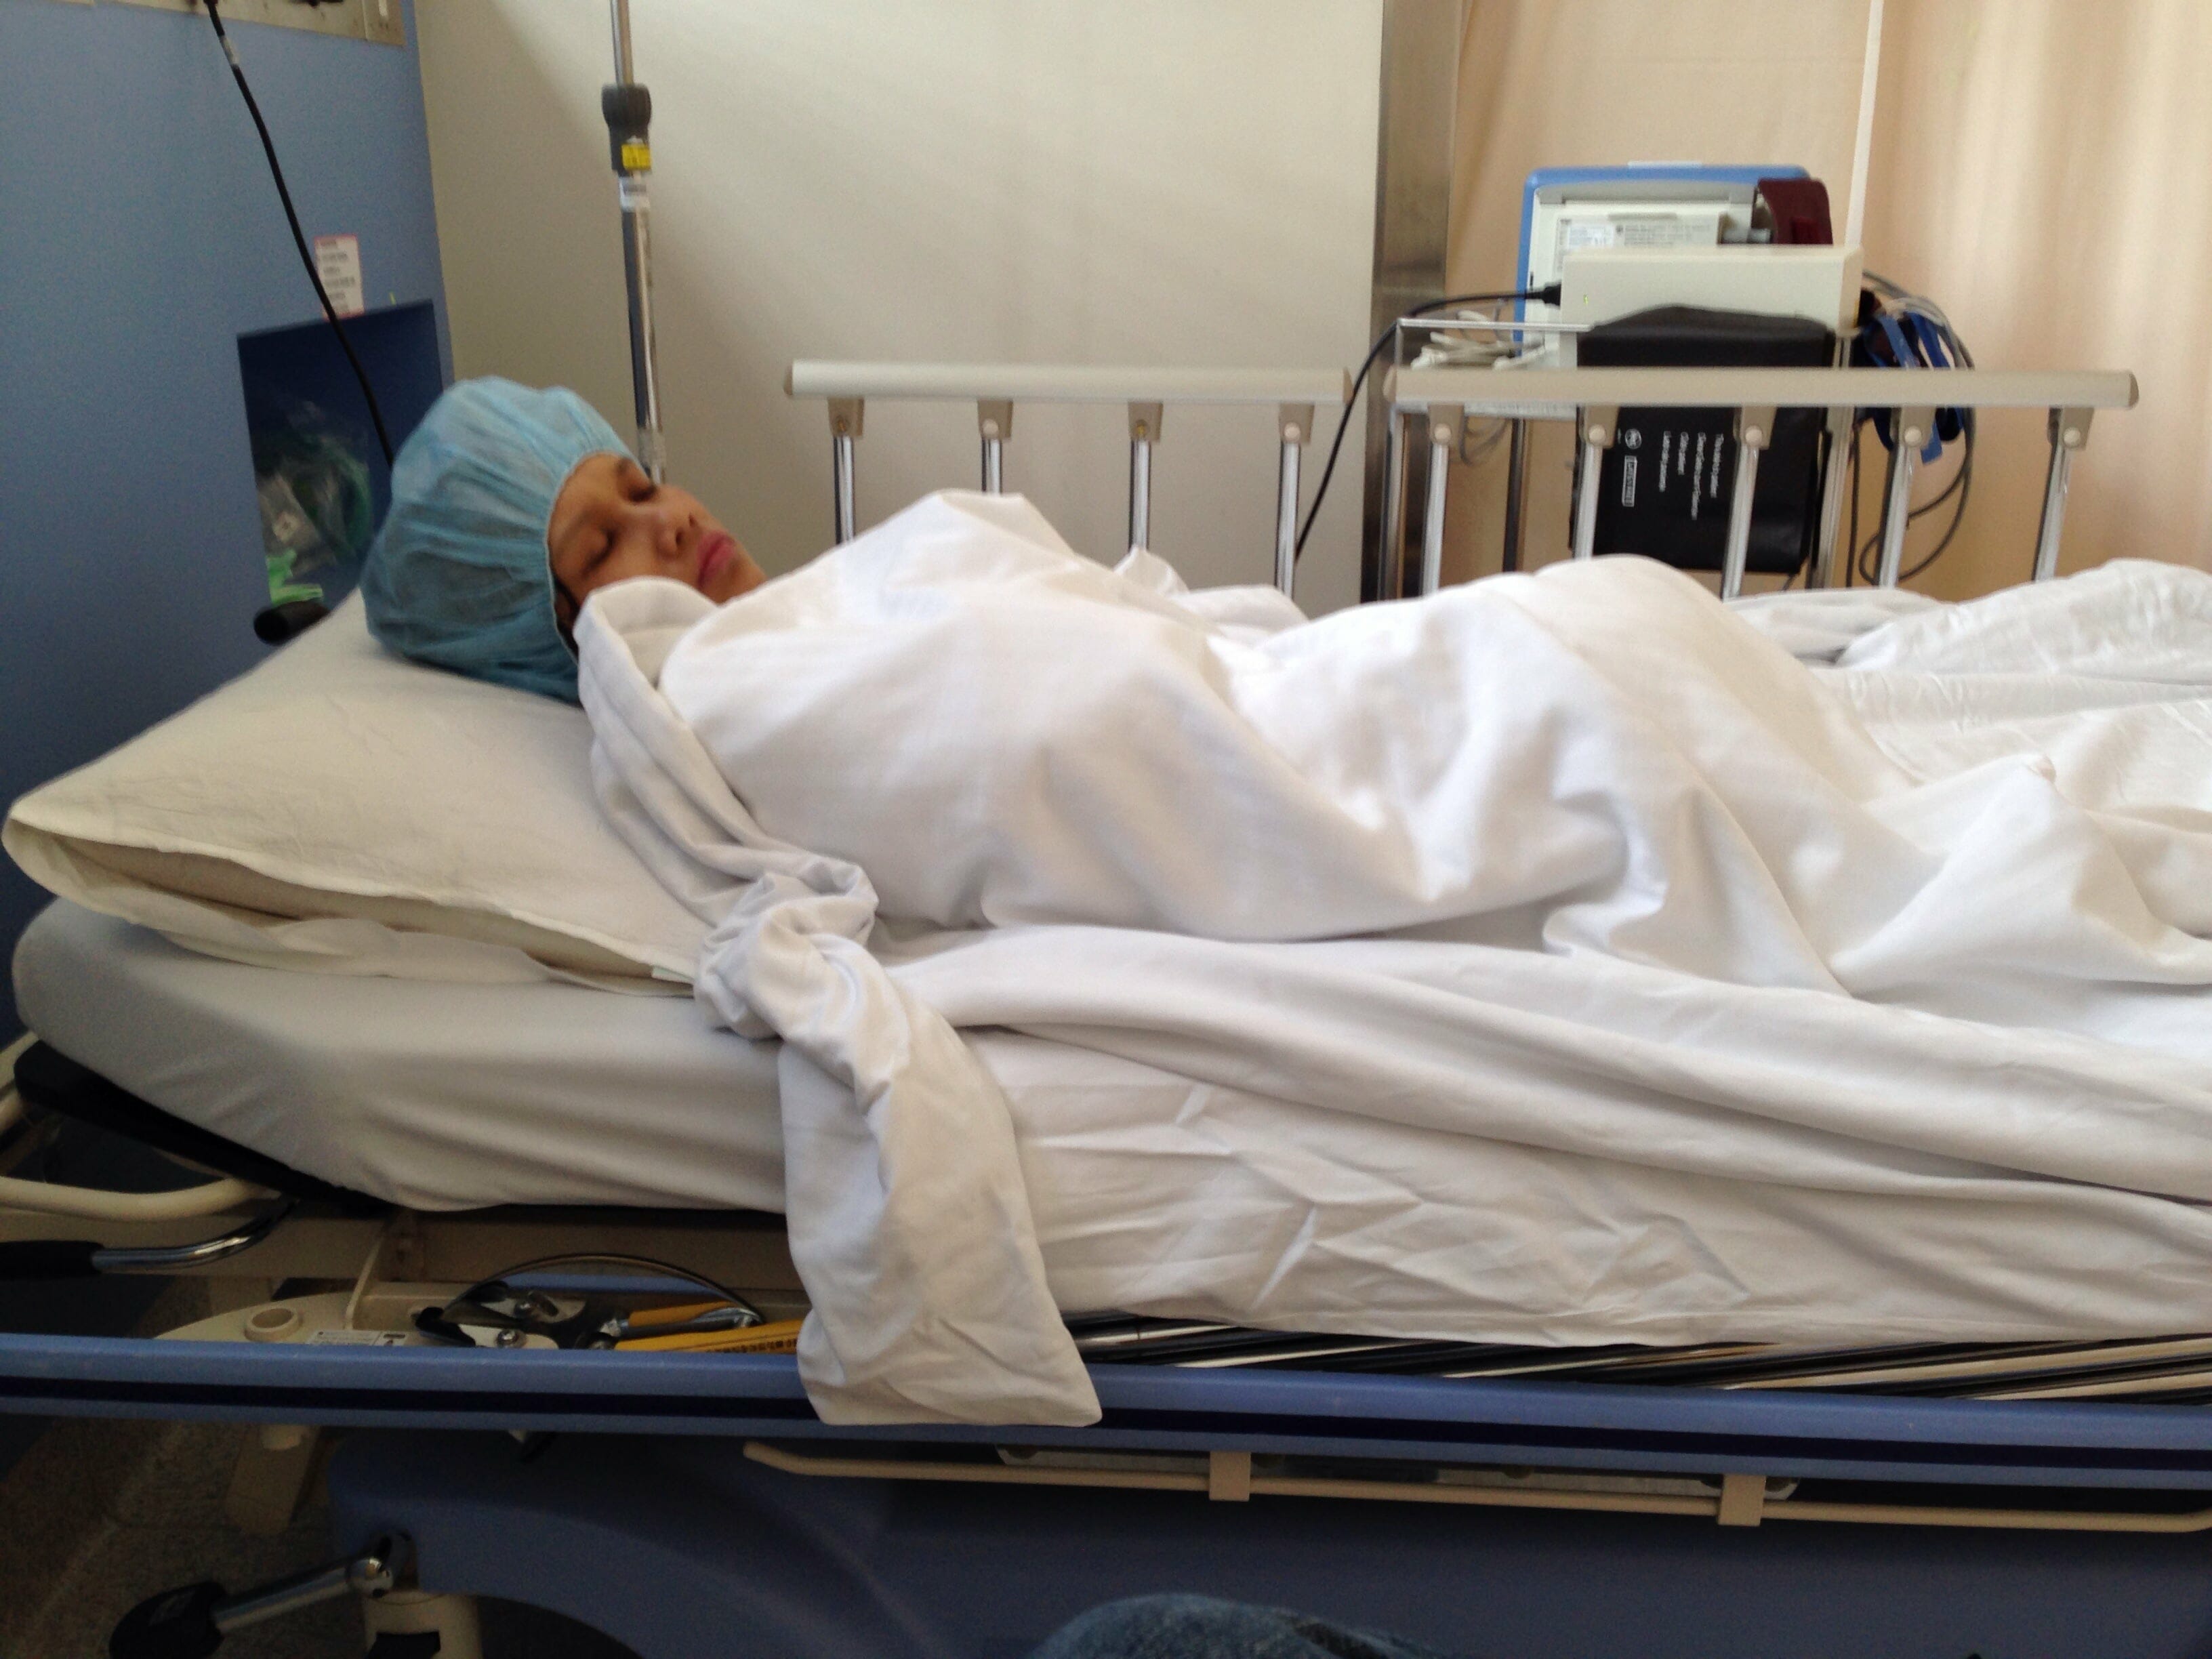 Author lying on a hospital bed wrapped in a blanket.